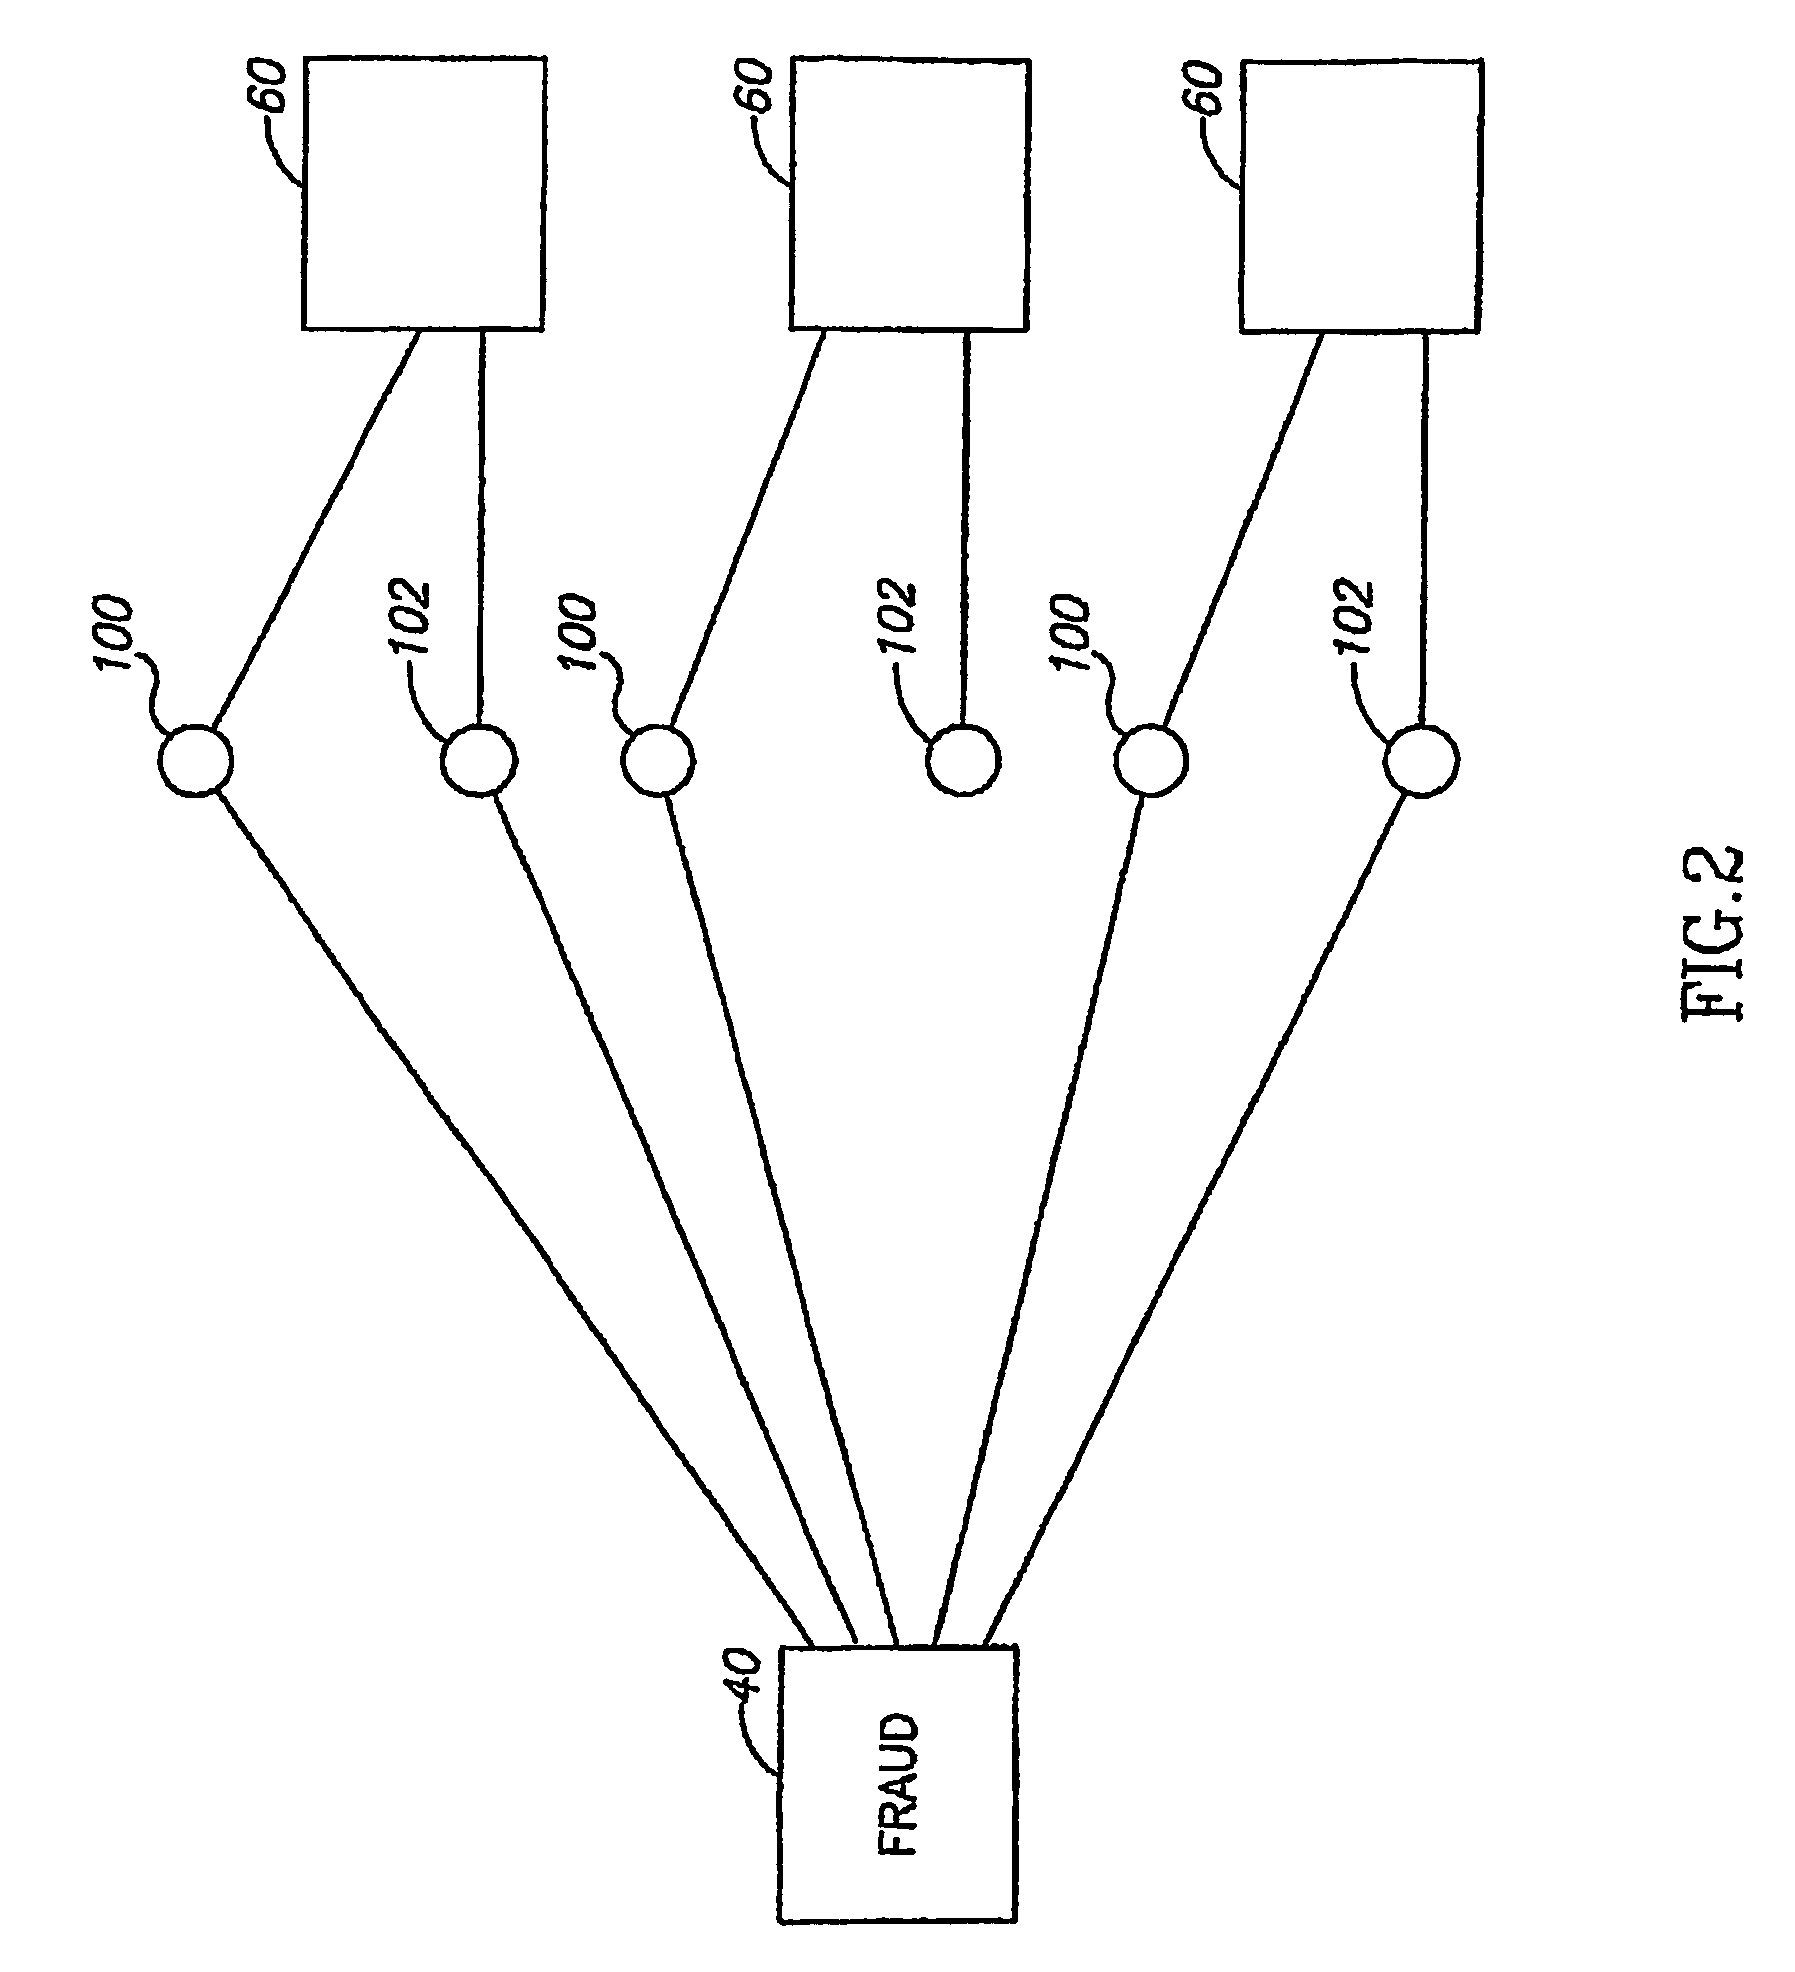 System and method of addressing email and electronic communication fraud